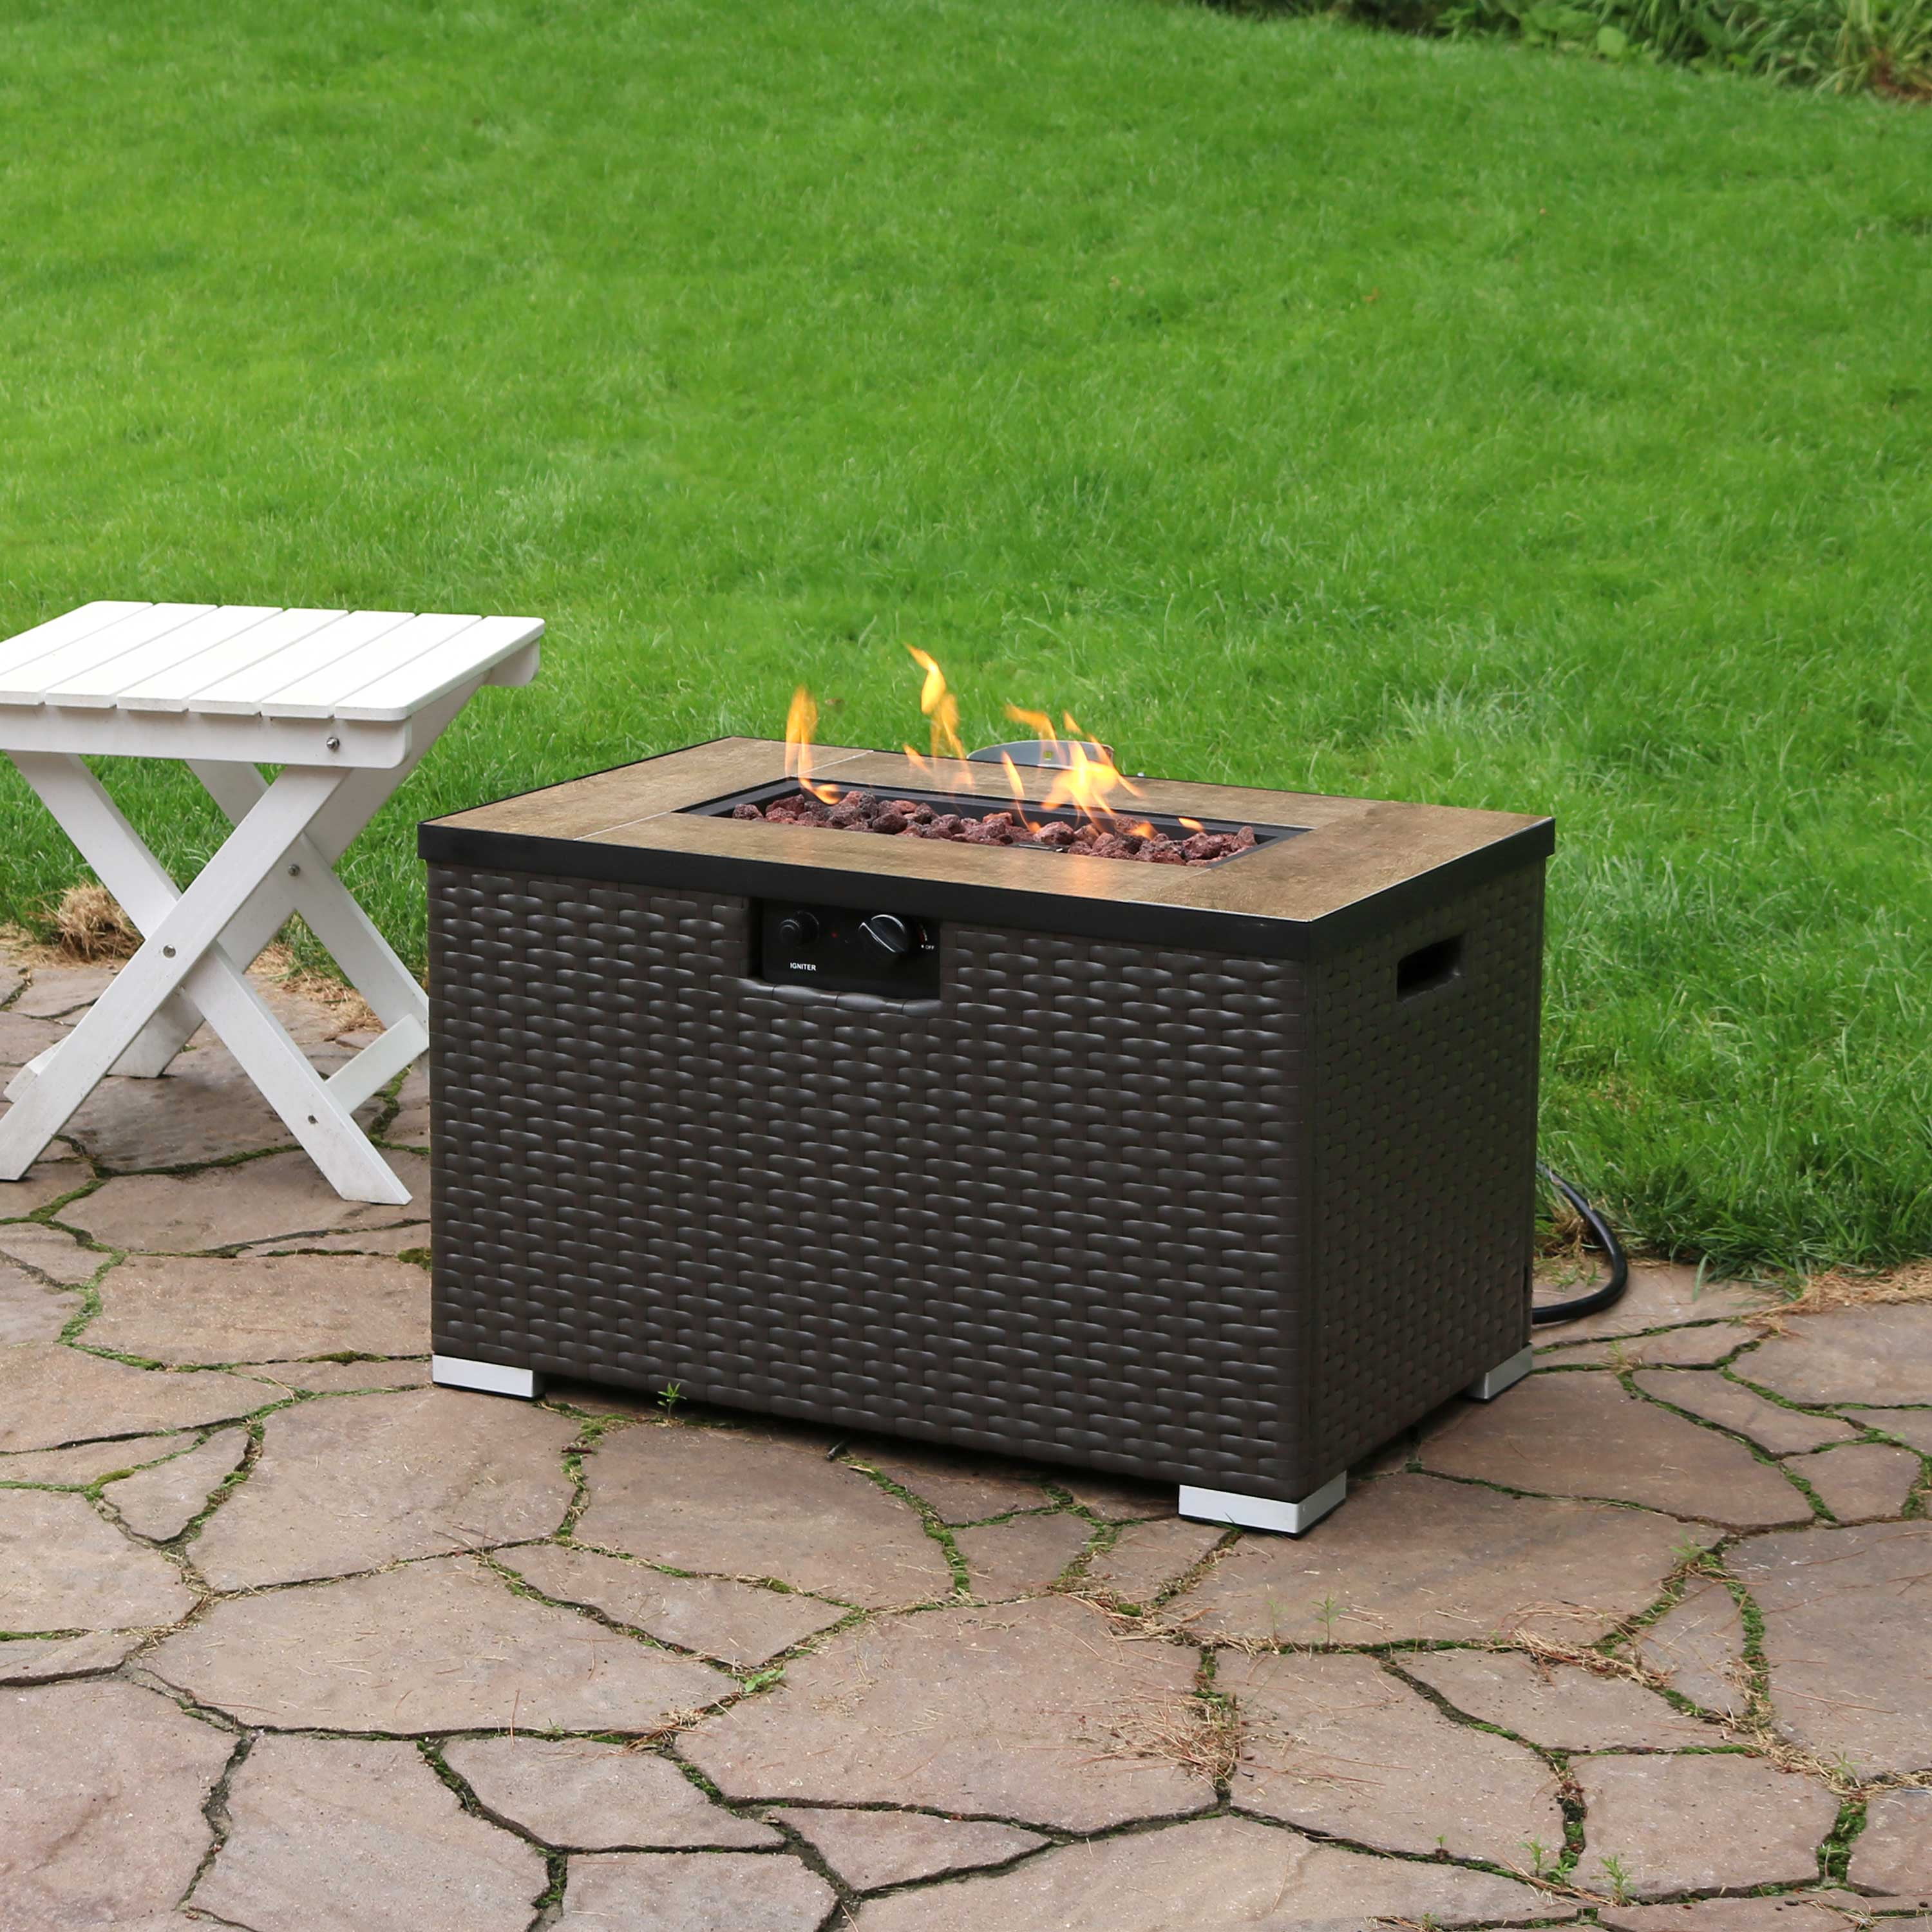 How can this propane fire pit entirely change your outdoor experience this fall: 50 000 BTU Gas Fire Pit Table Provides Spacious Warmth for Cool Nights